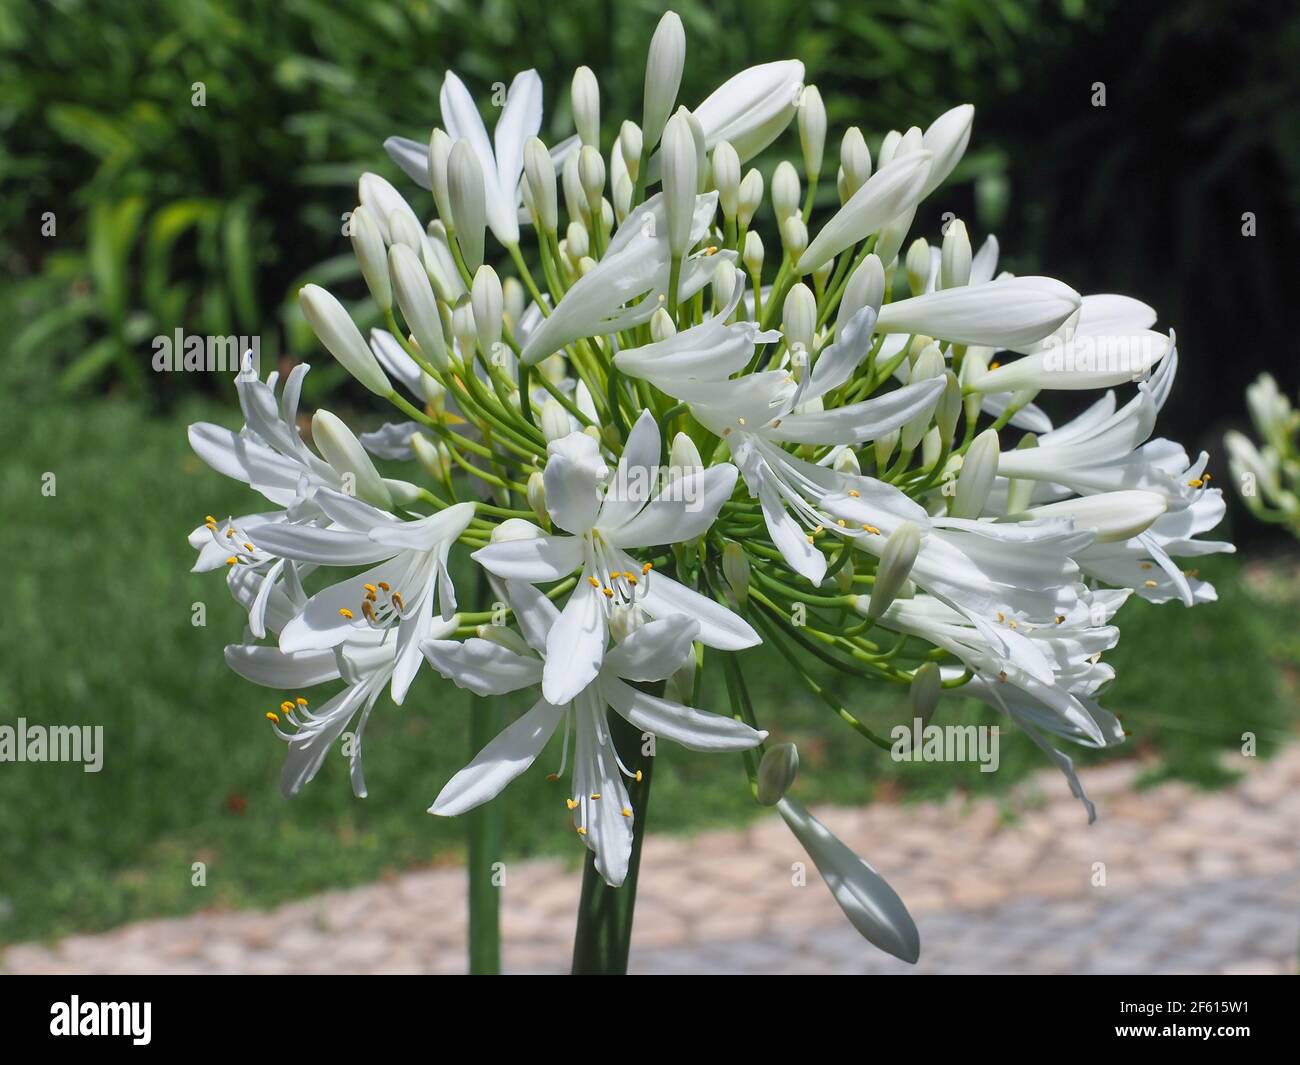 Beautiful Agapanthus Africanus Albus, white lily flower, close up. African lily or Lily of the Nile is popular garden plant in Amaryllidaceae family. Stock Photo